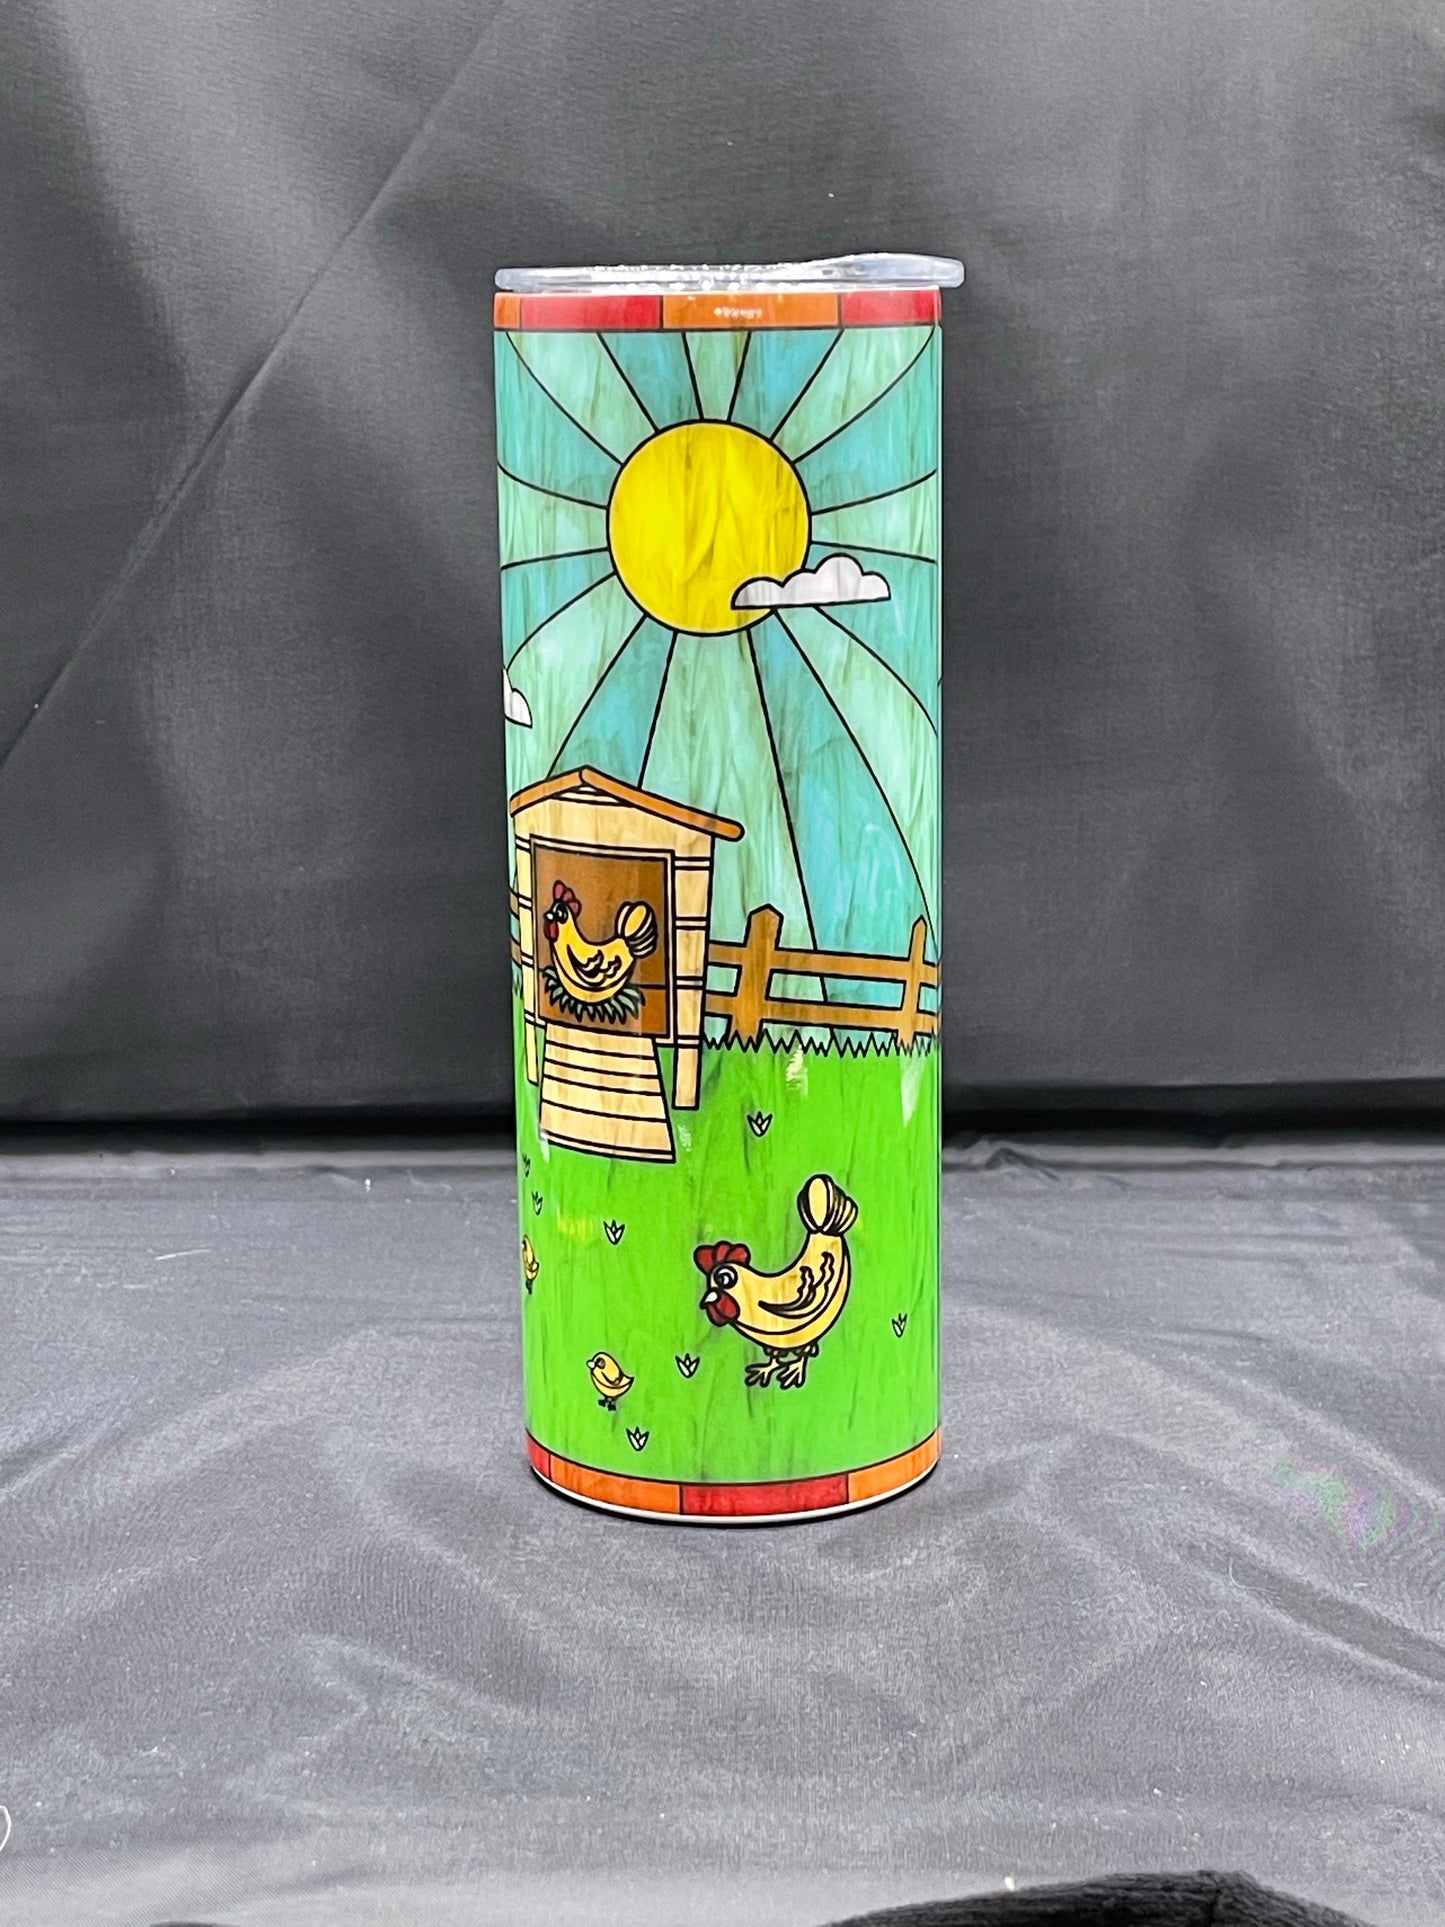 Chickens tumbler. Stained glass effect.